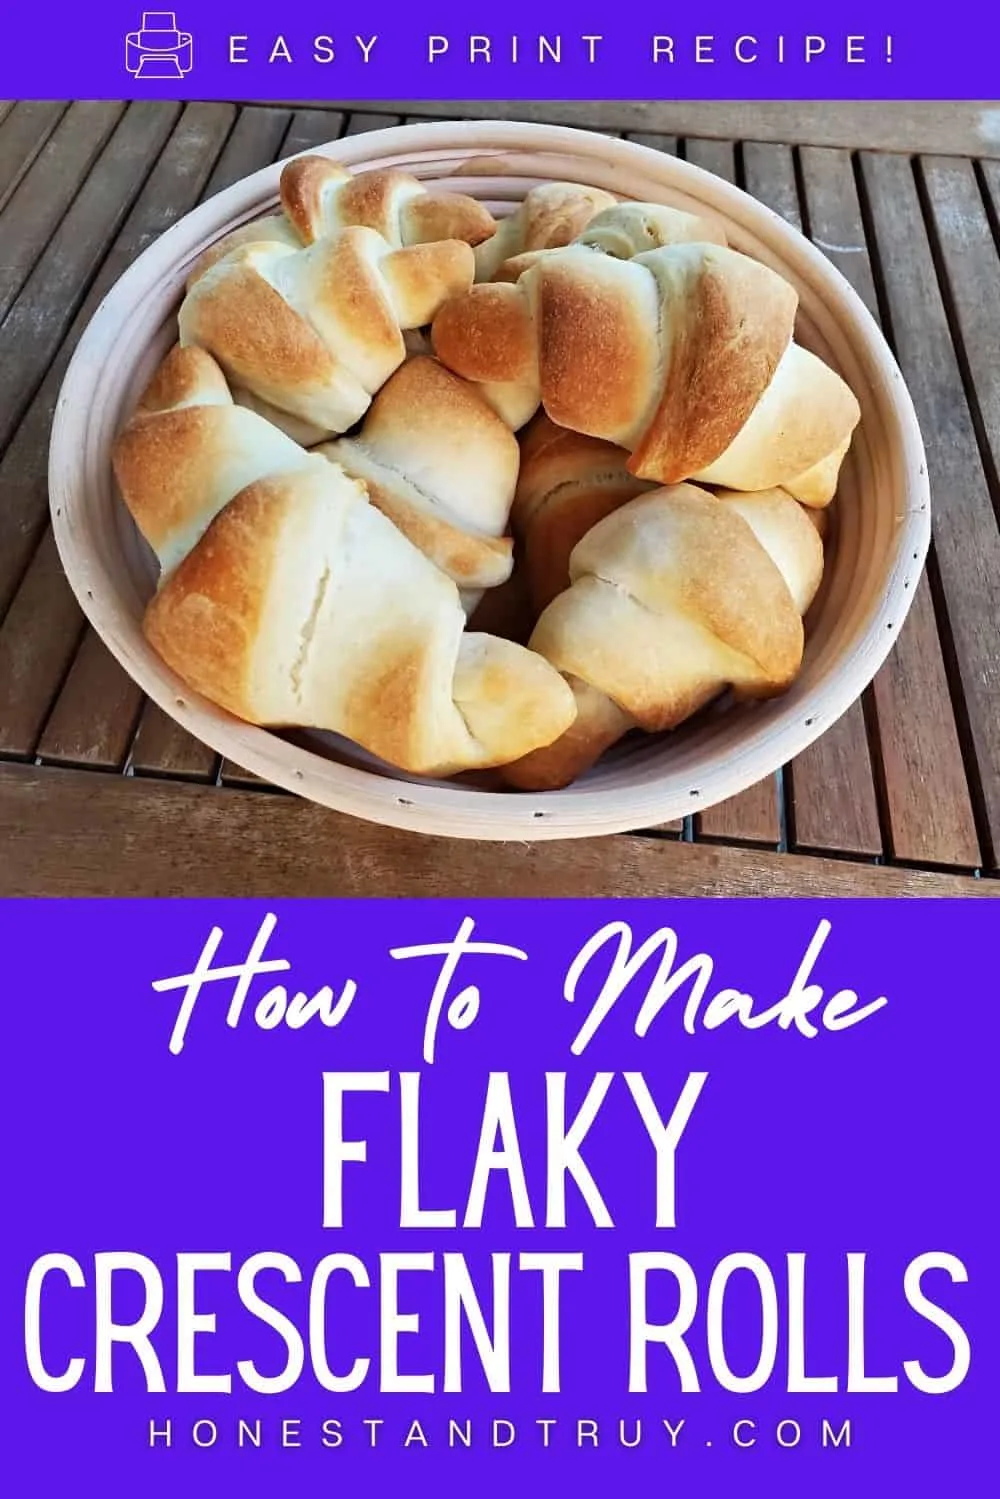 Basket of crescent rolls with text how to make flaky crescent rolls.